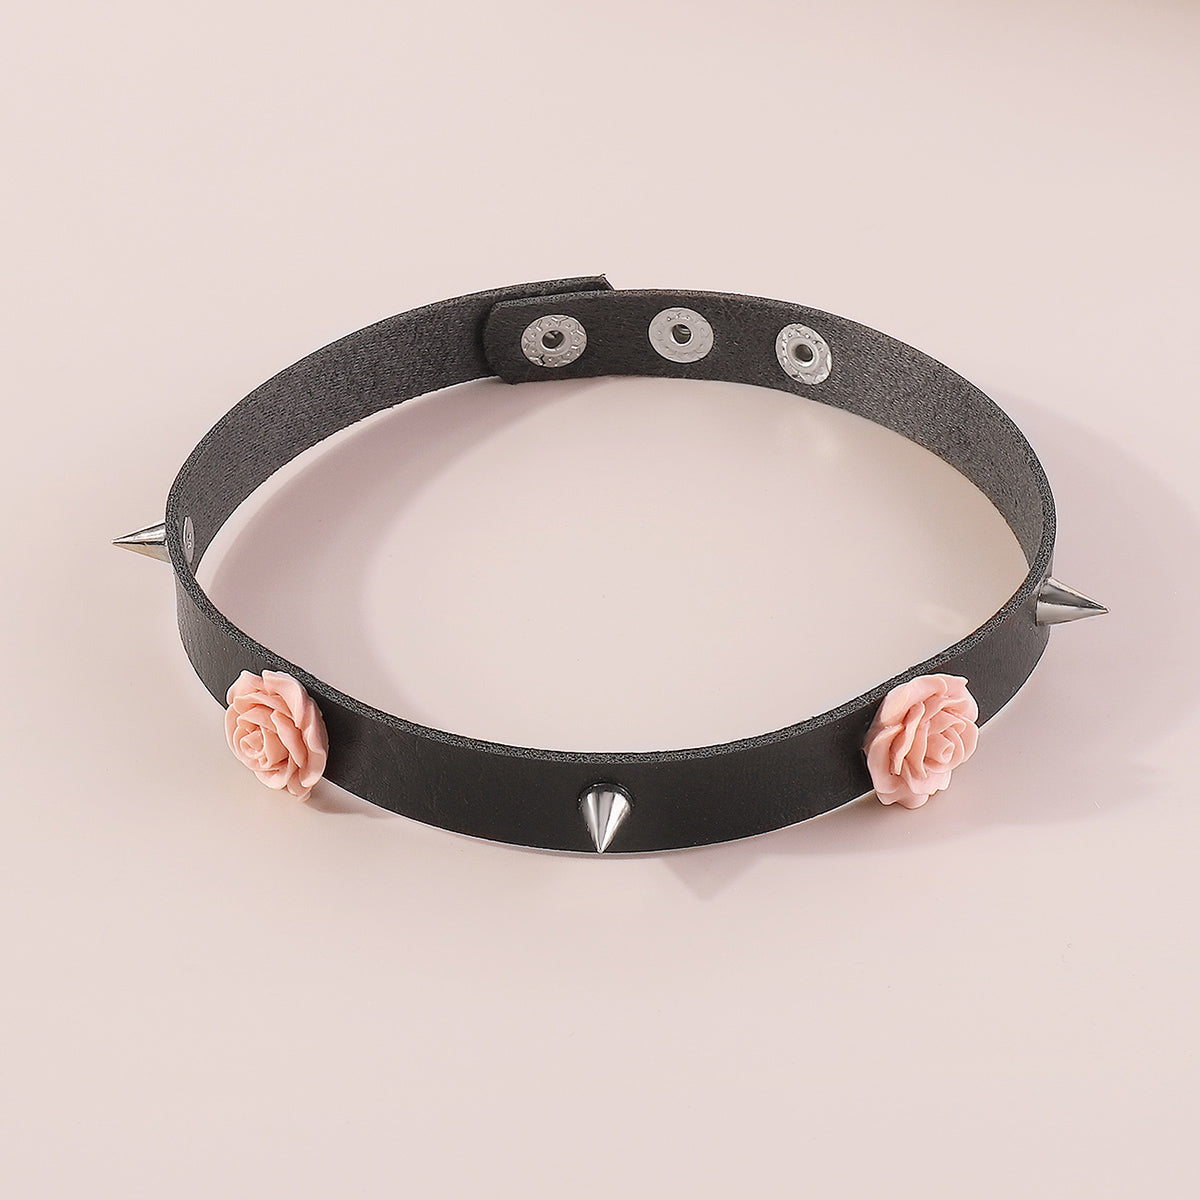 N11150 PU Leather With Resin Flower Choker Necklace